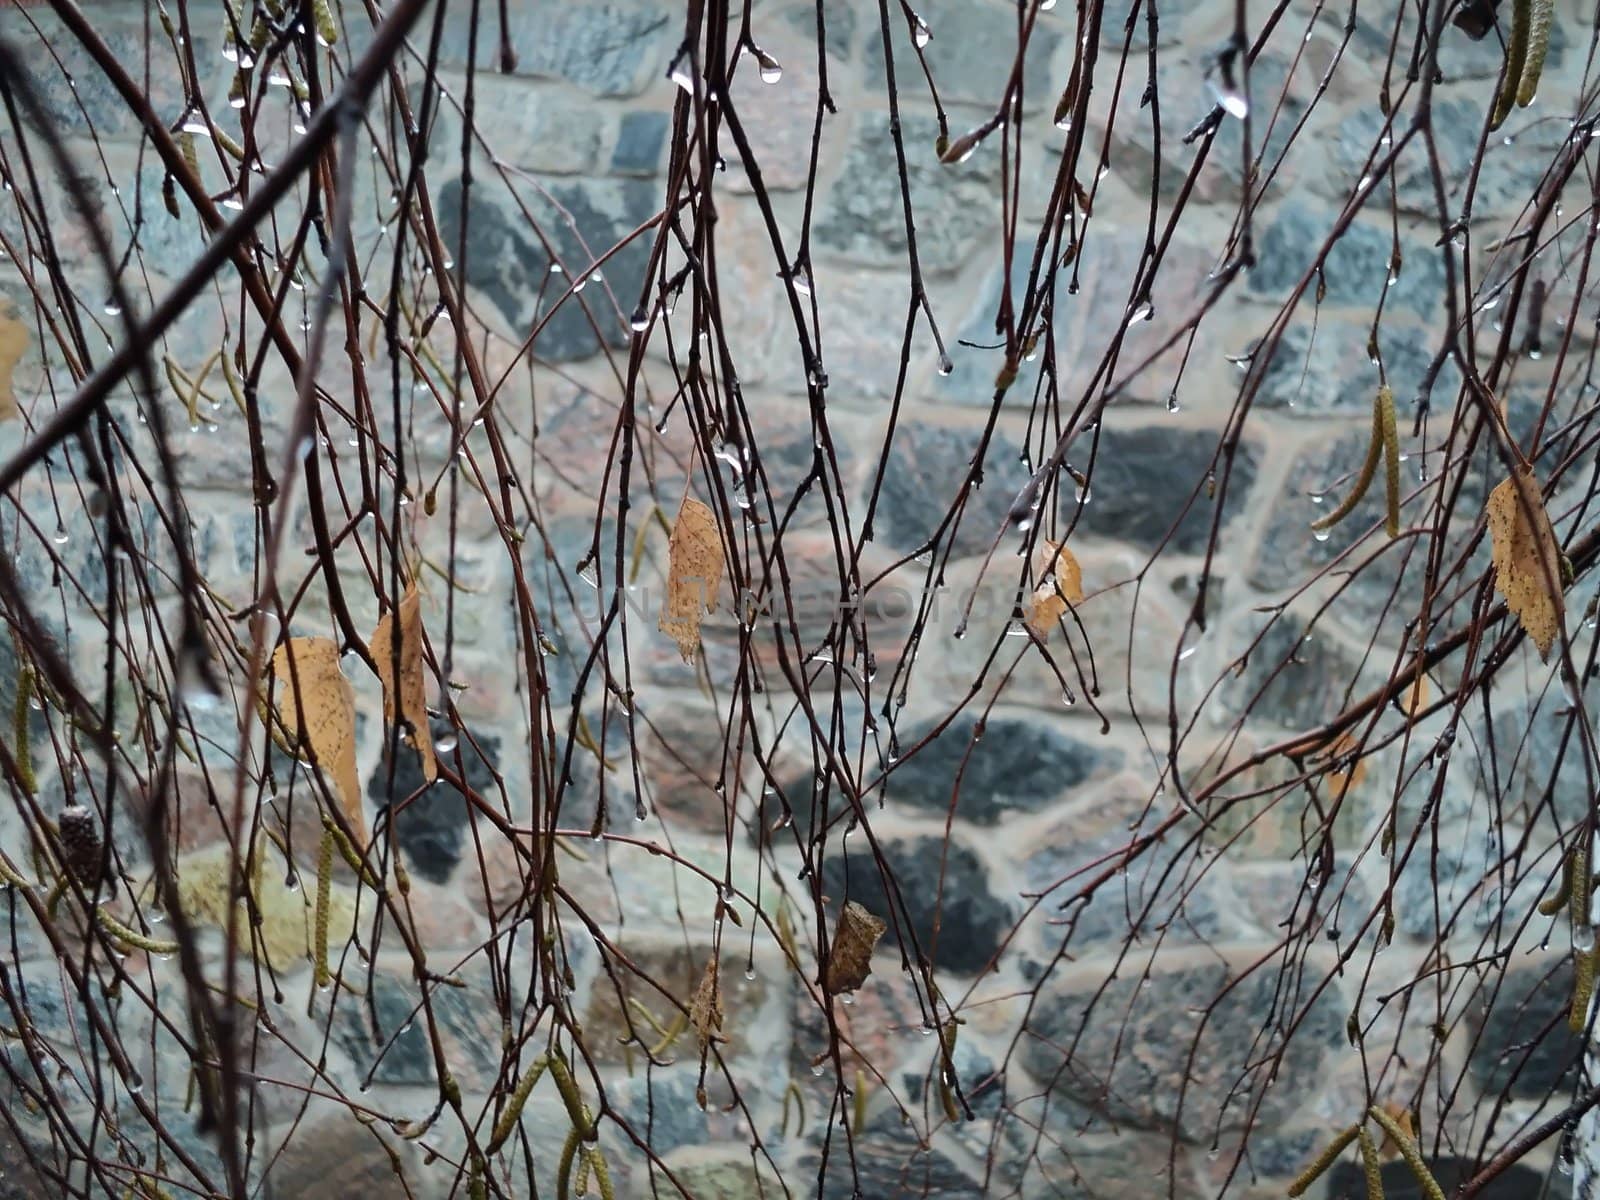 Birch branches against a stone wall in the rain fall